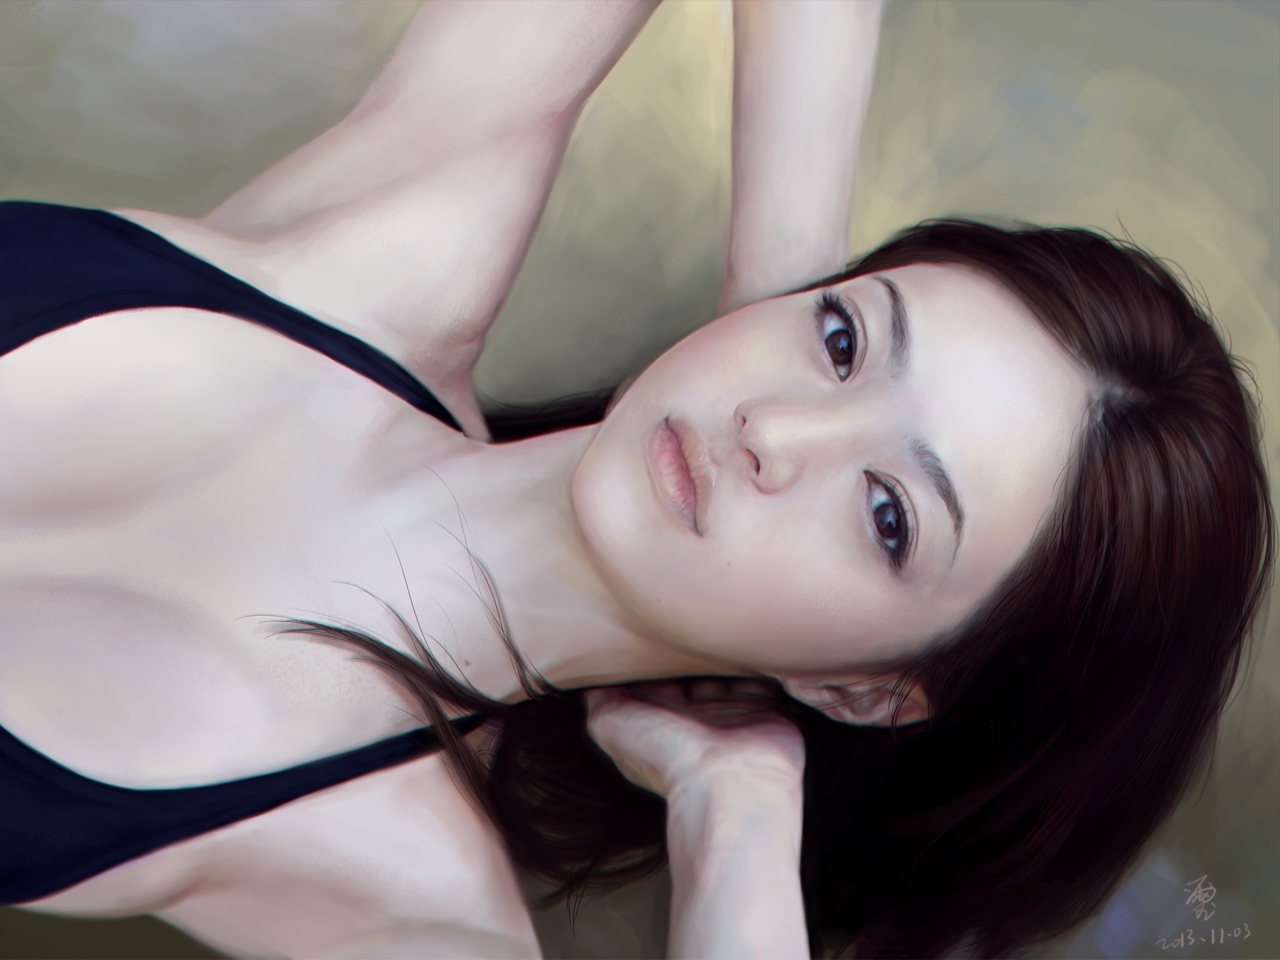 Das Girl's Face Realistic Painting Wallpaper 1280x960